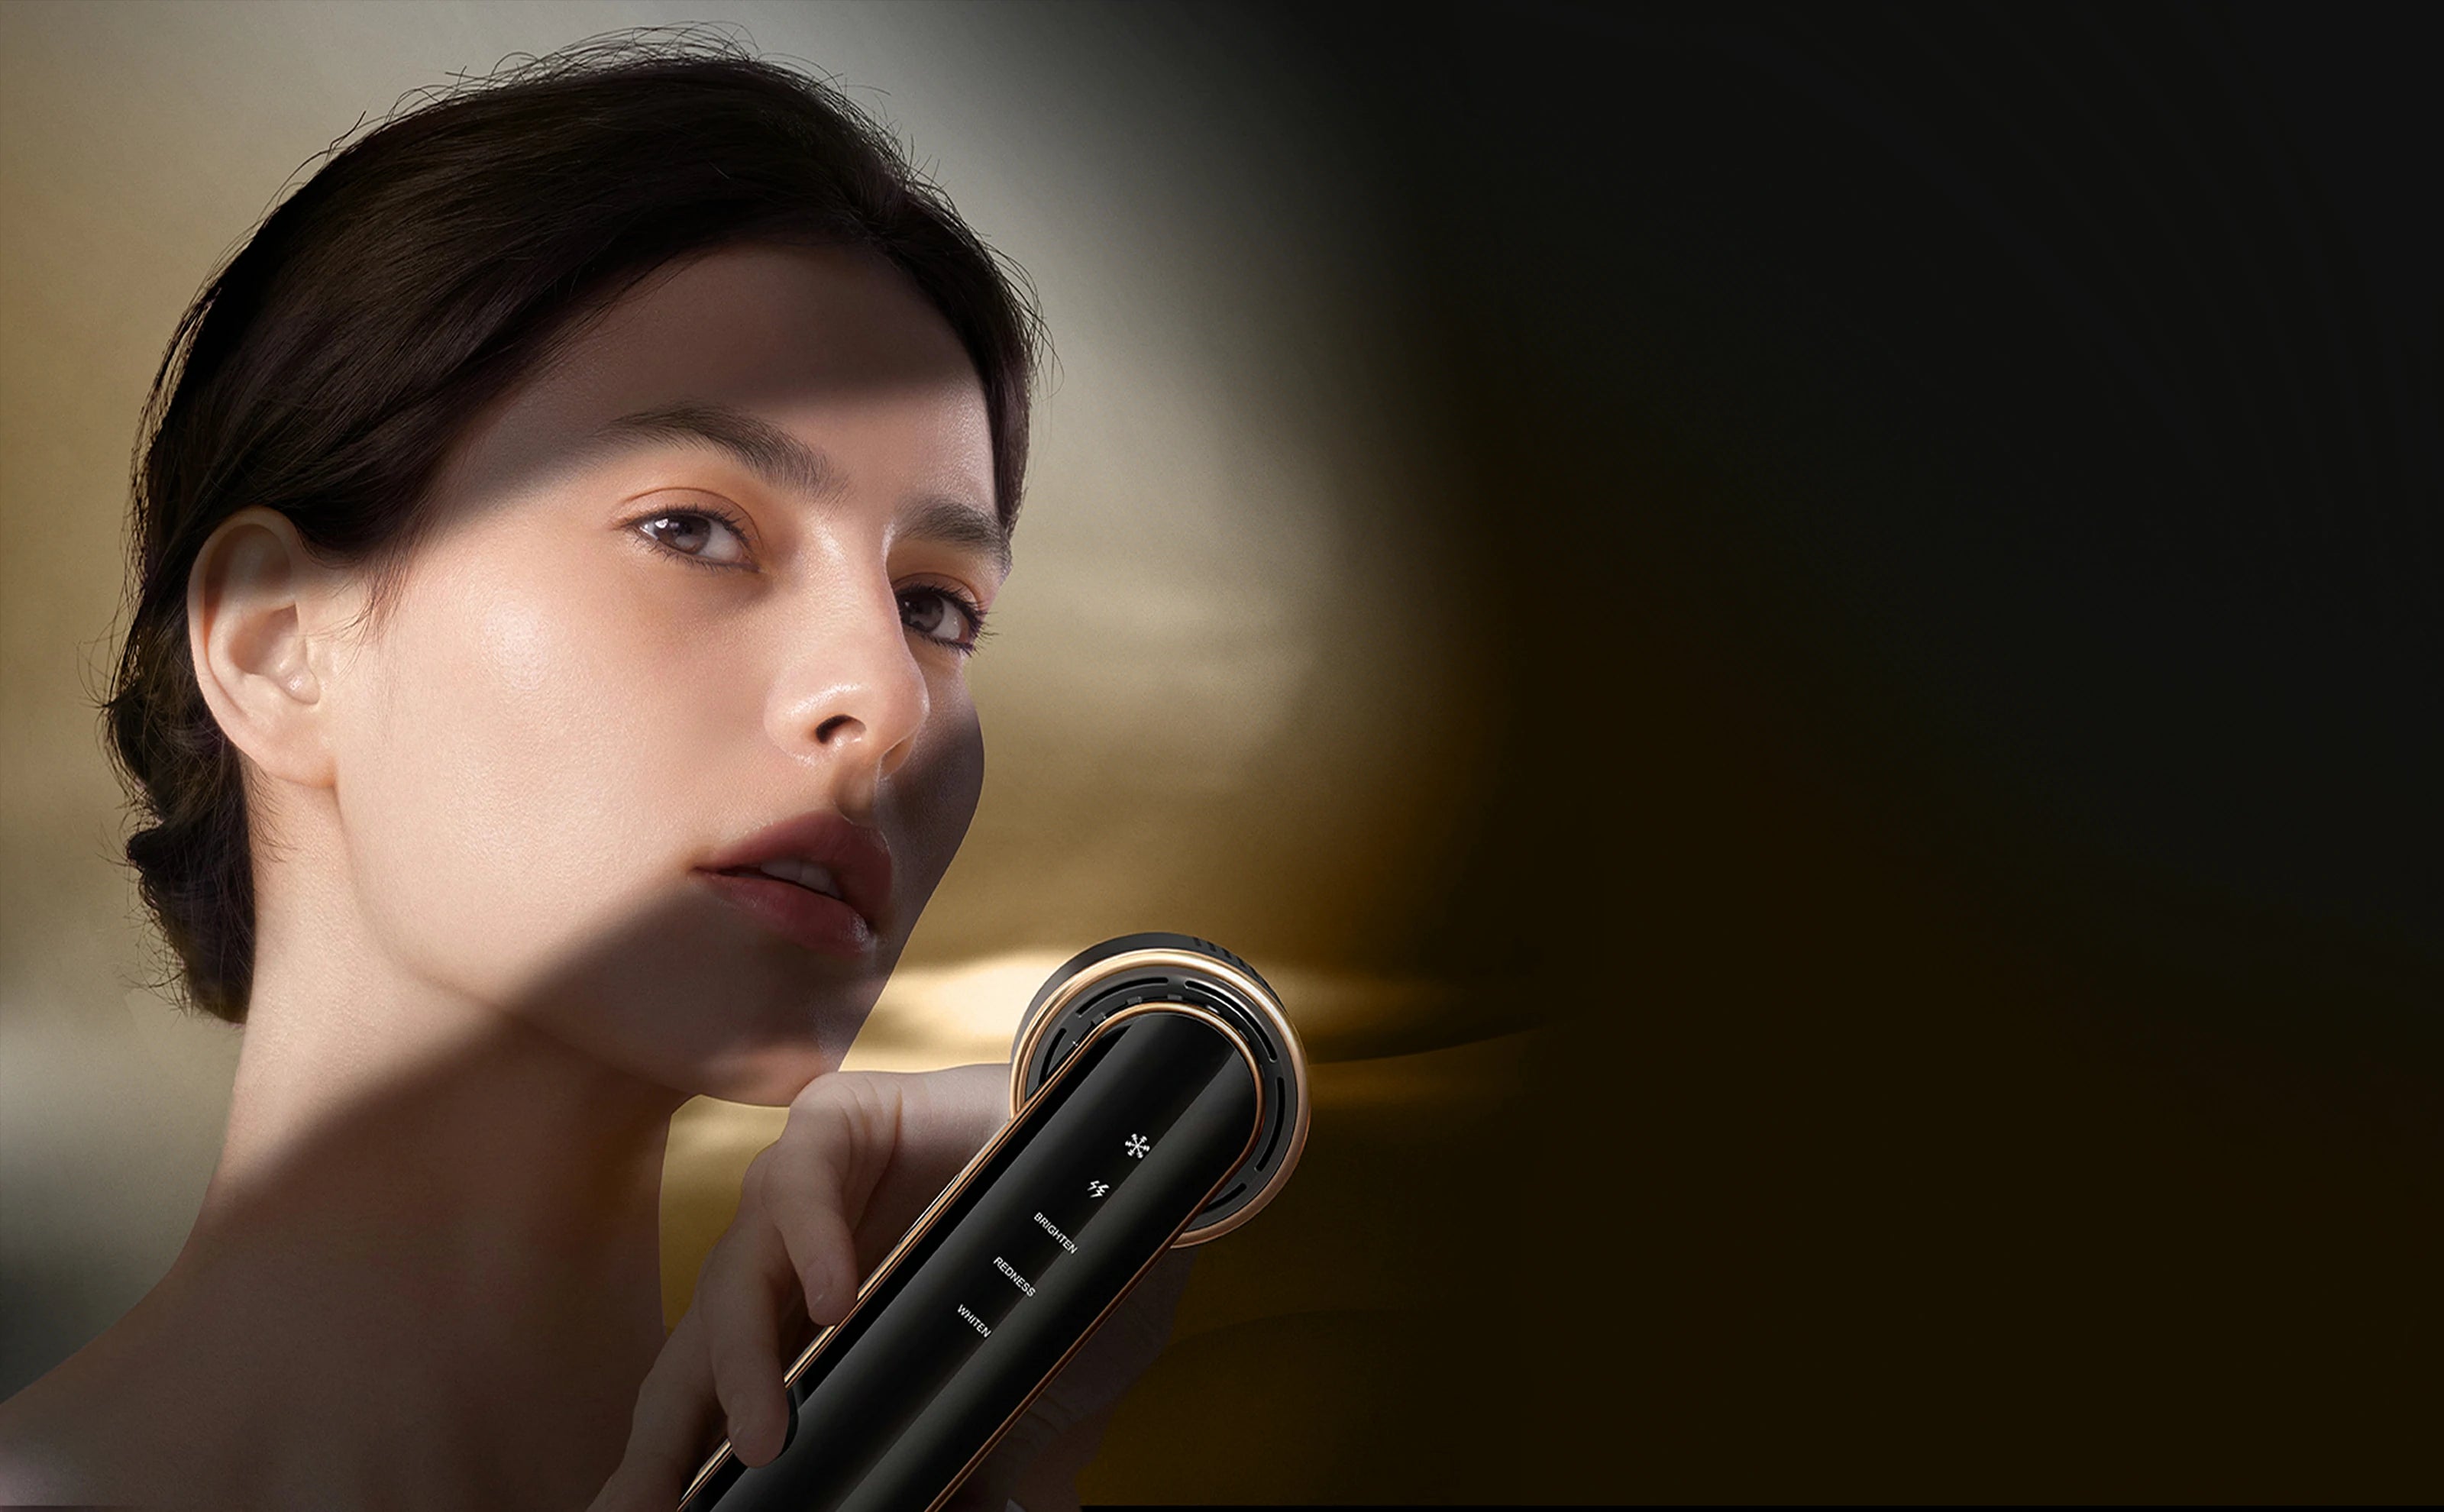 Woman experiencing advanced skincare treatment with the JOVS Blacken DPL Photofacial Device, showcasing a sleek design and efficacy.